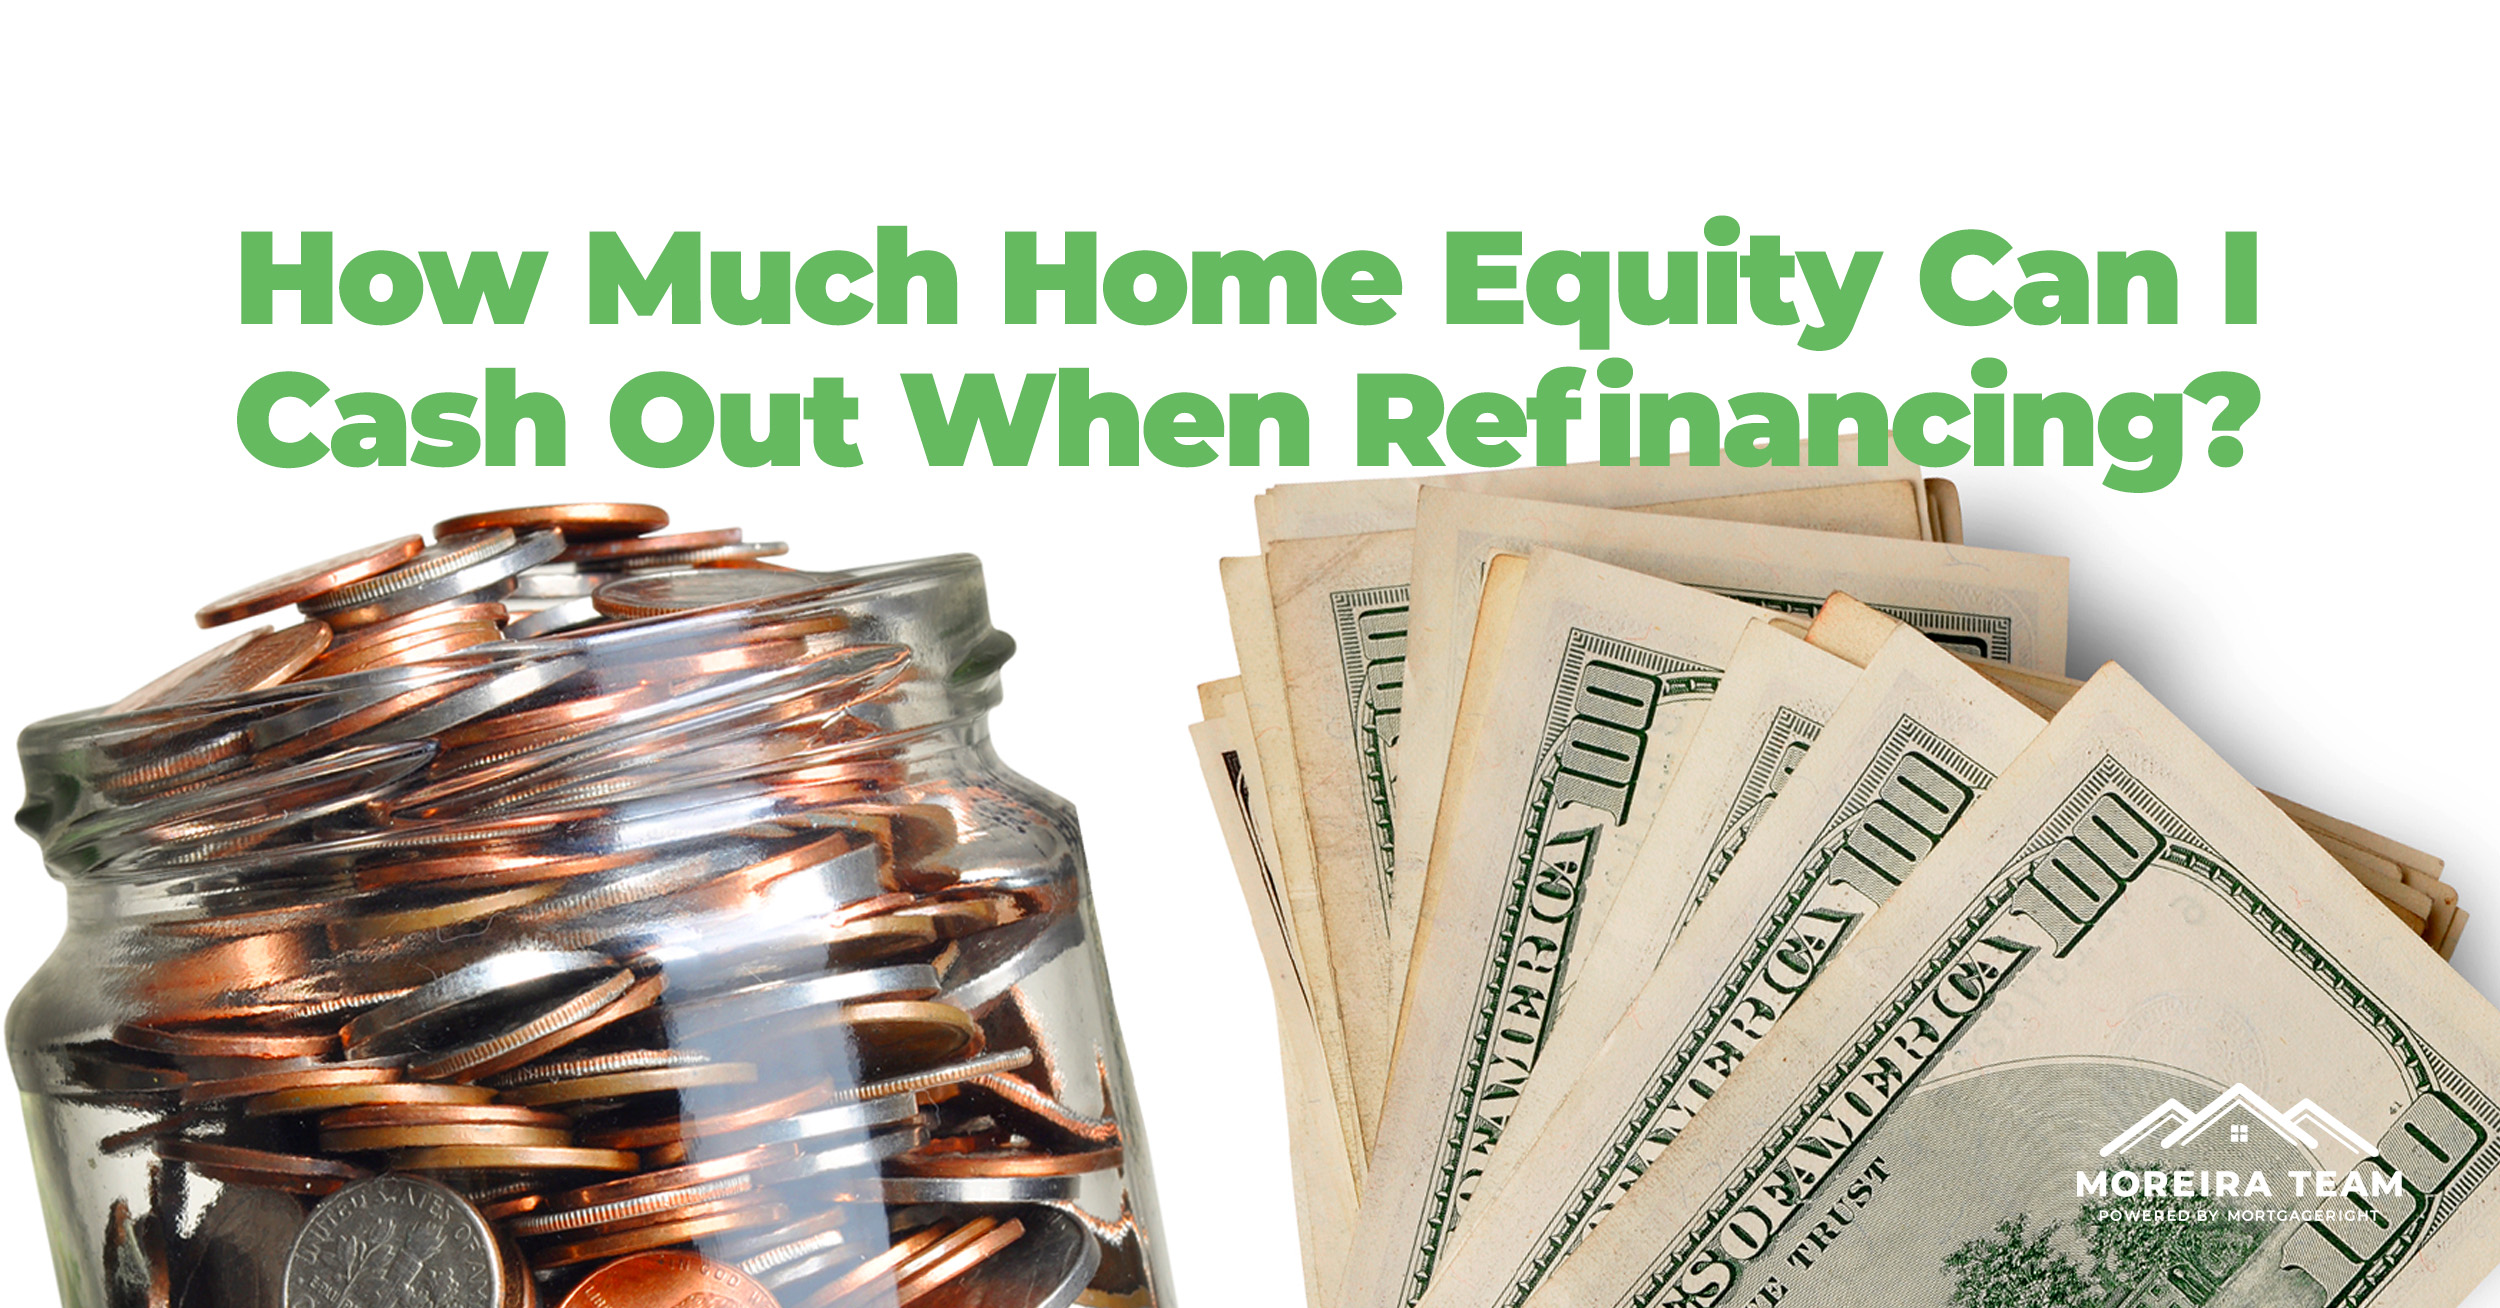 How Much Home Equity Can I Cash Out When Refinancing?